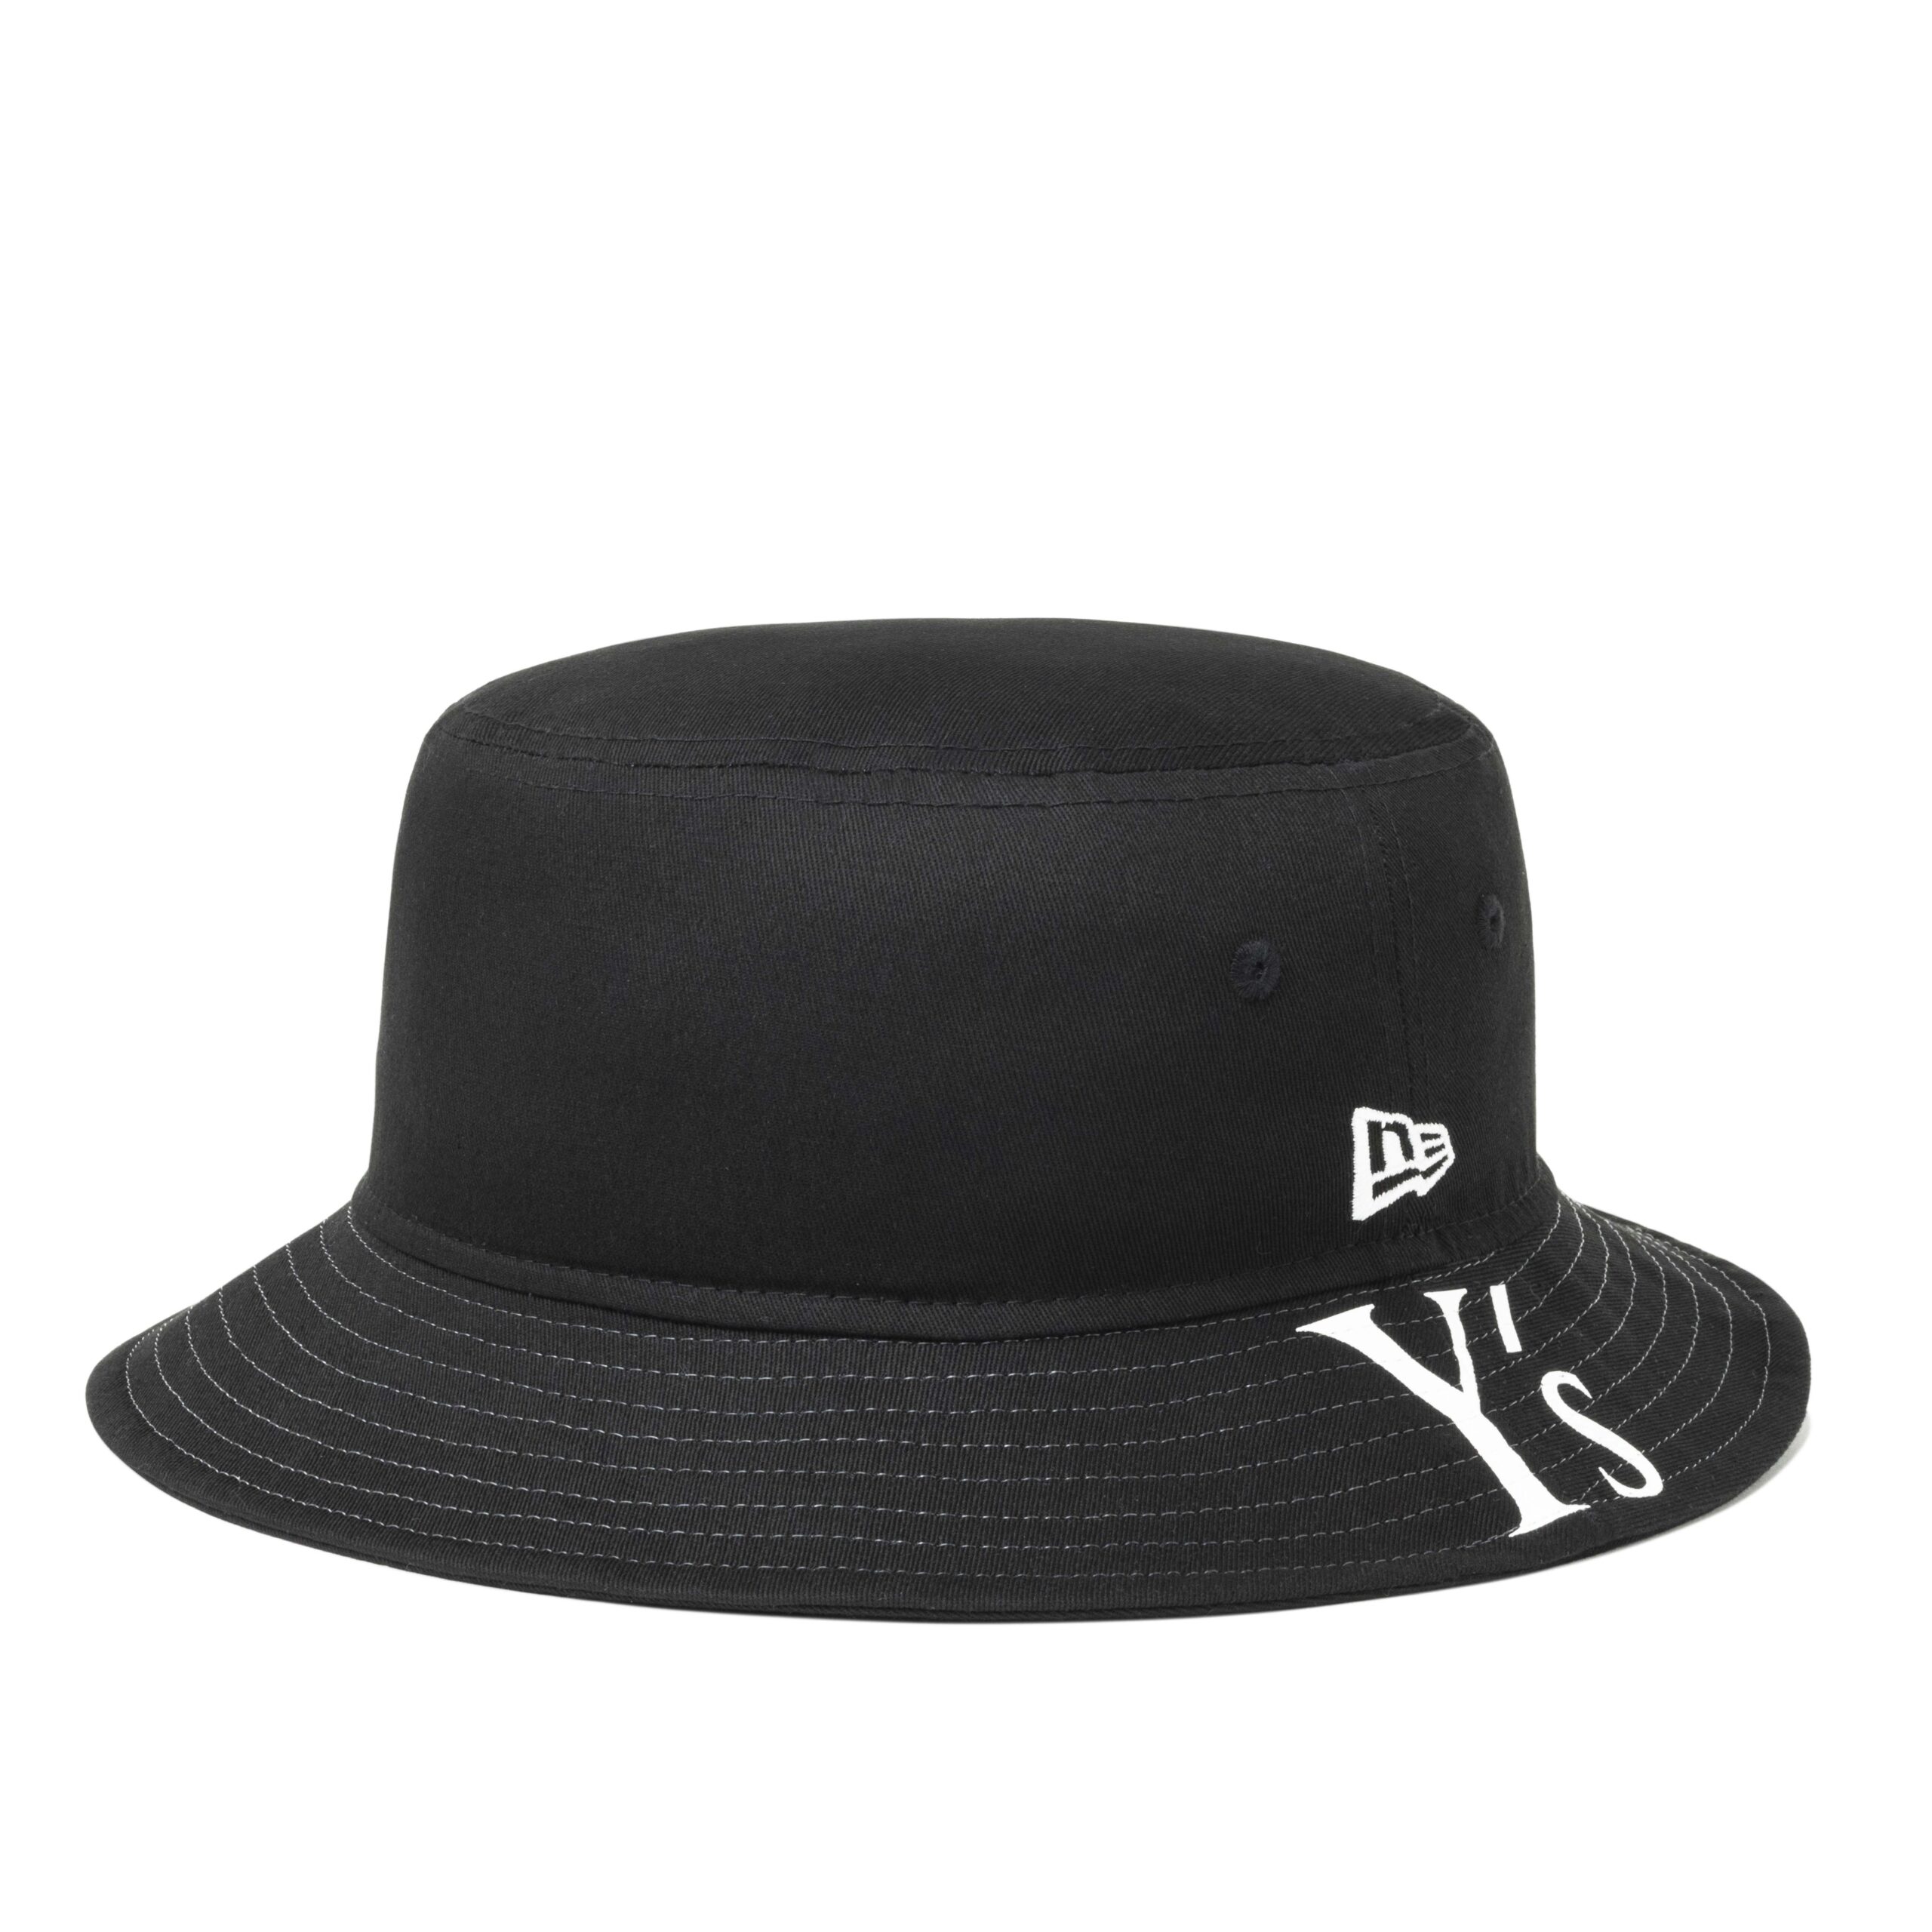 Y's x New Era AW22 COLLECTION | Yohji Yamamoto Official Site